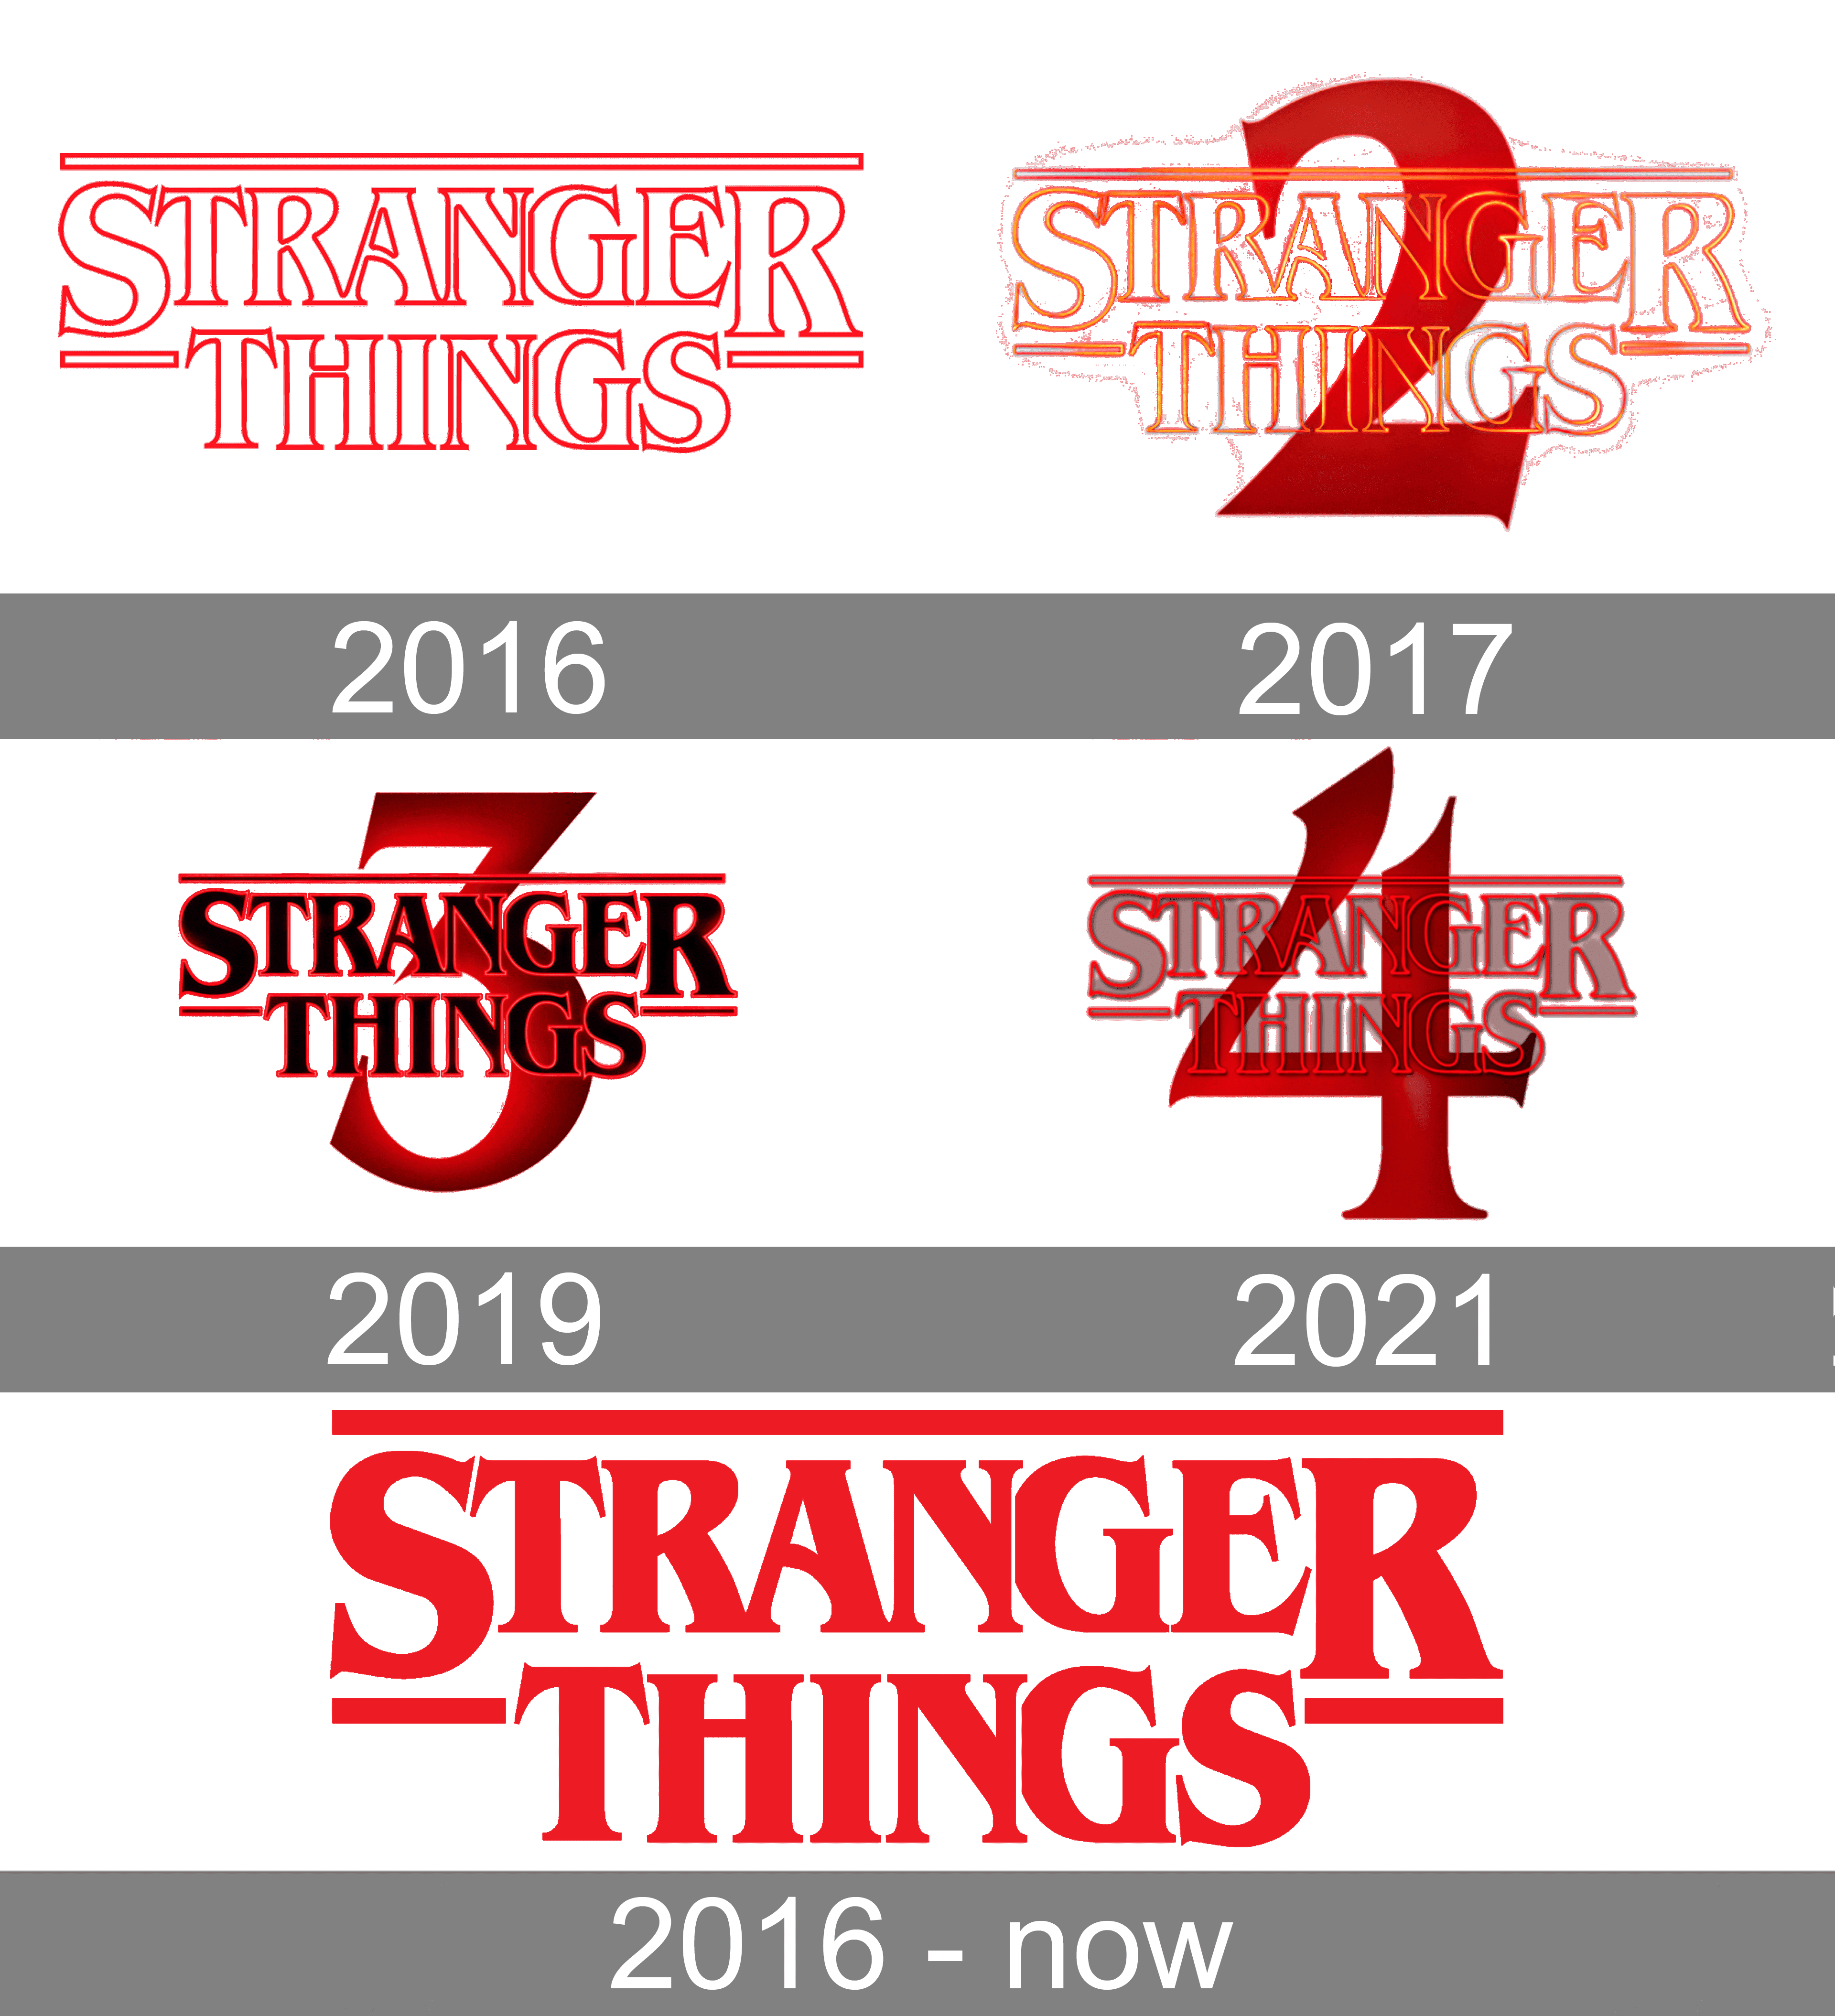 Stranger Things: The Deeper Meaning Behind a Netflix…